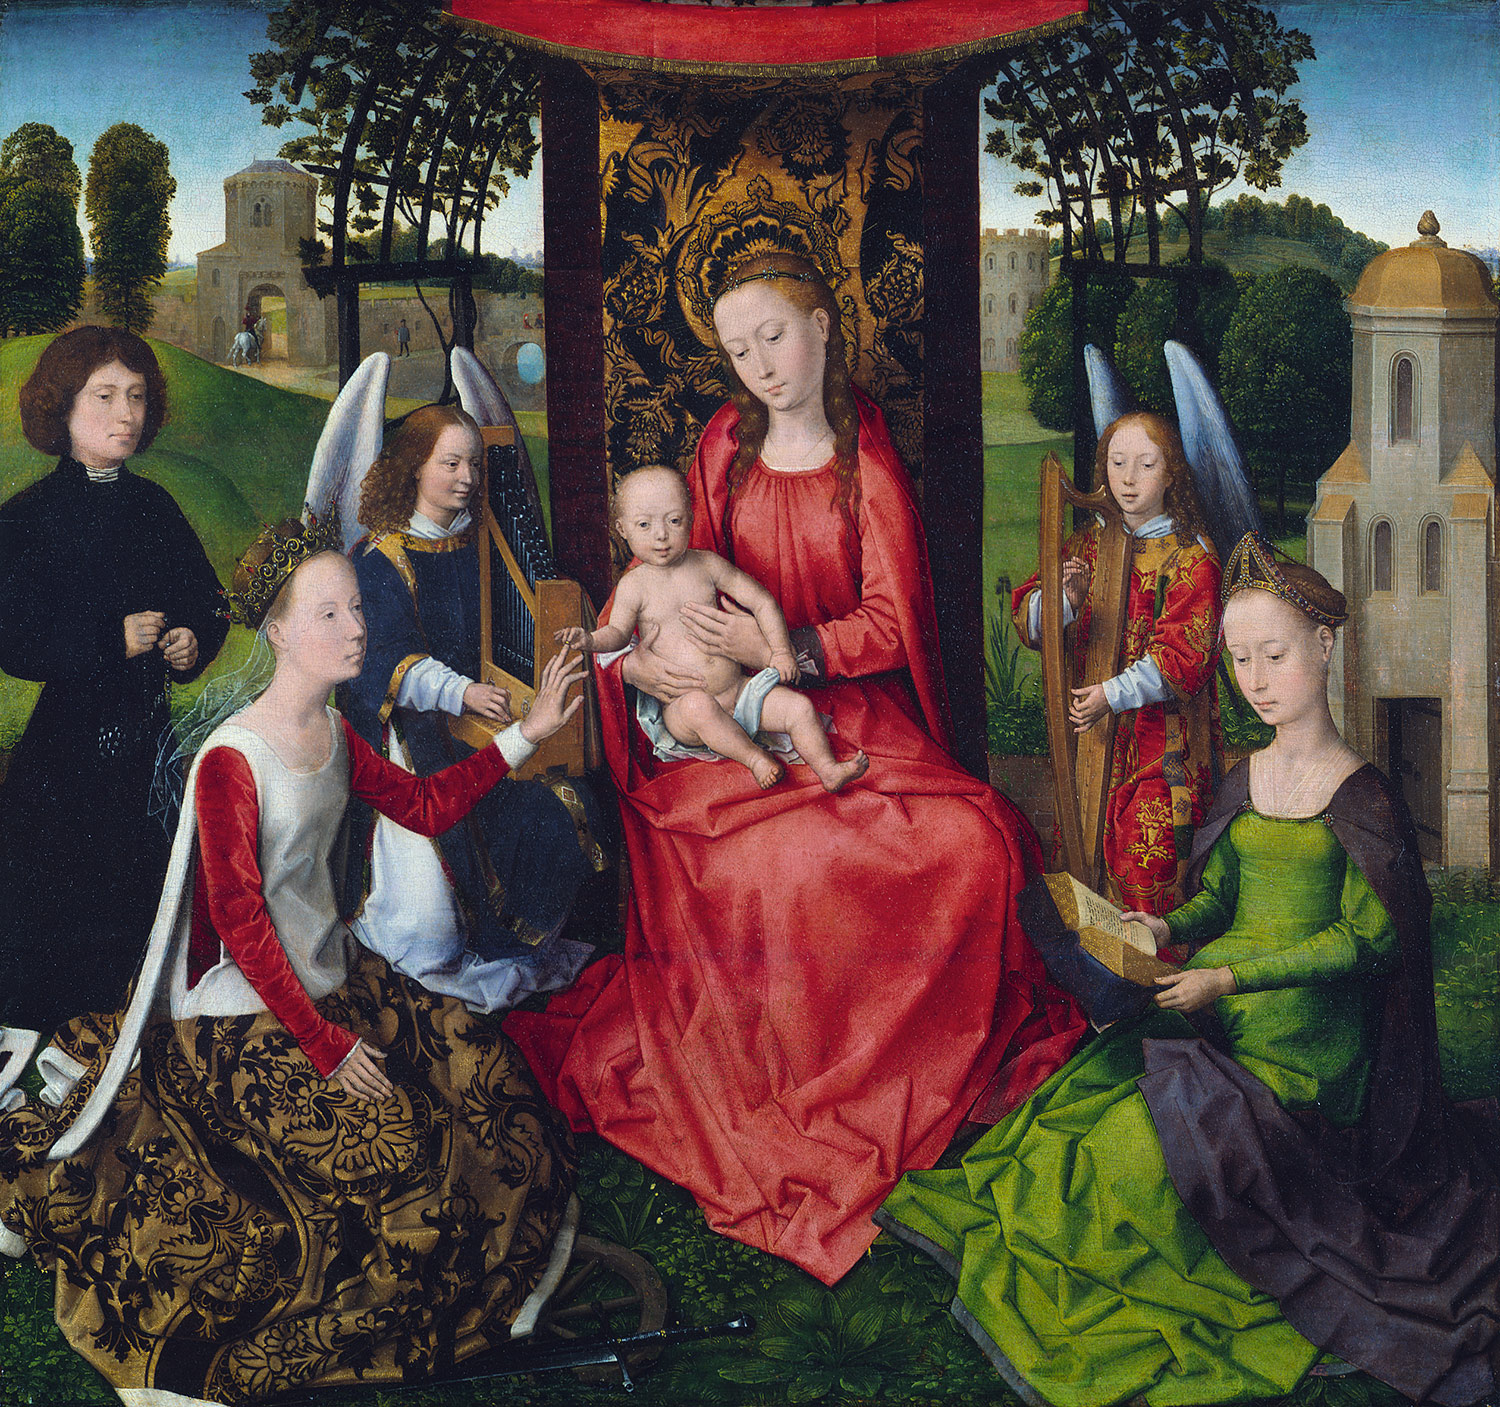 Virgin and Child with Saints Catherine of Alexandria and Barbara, by Hans Memling, 1479